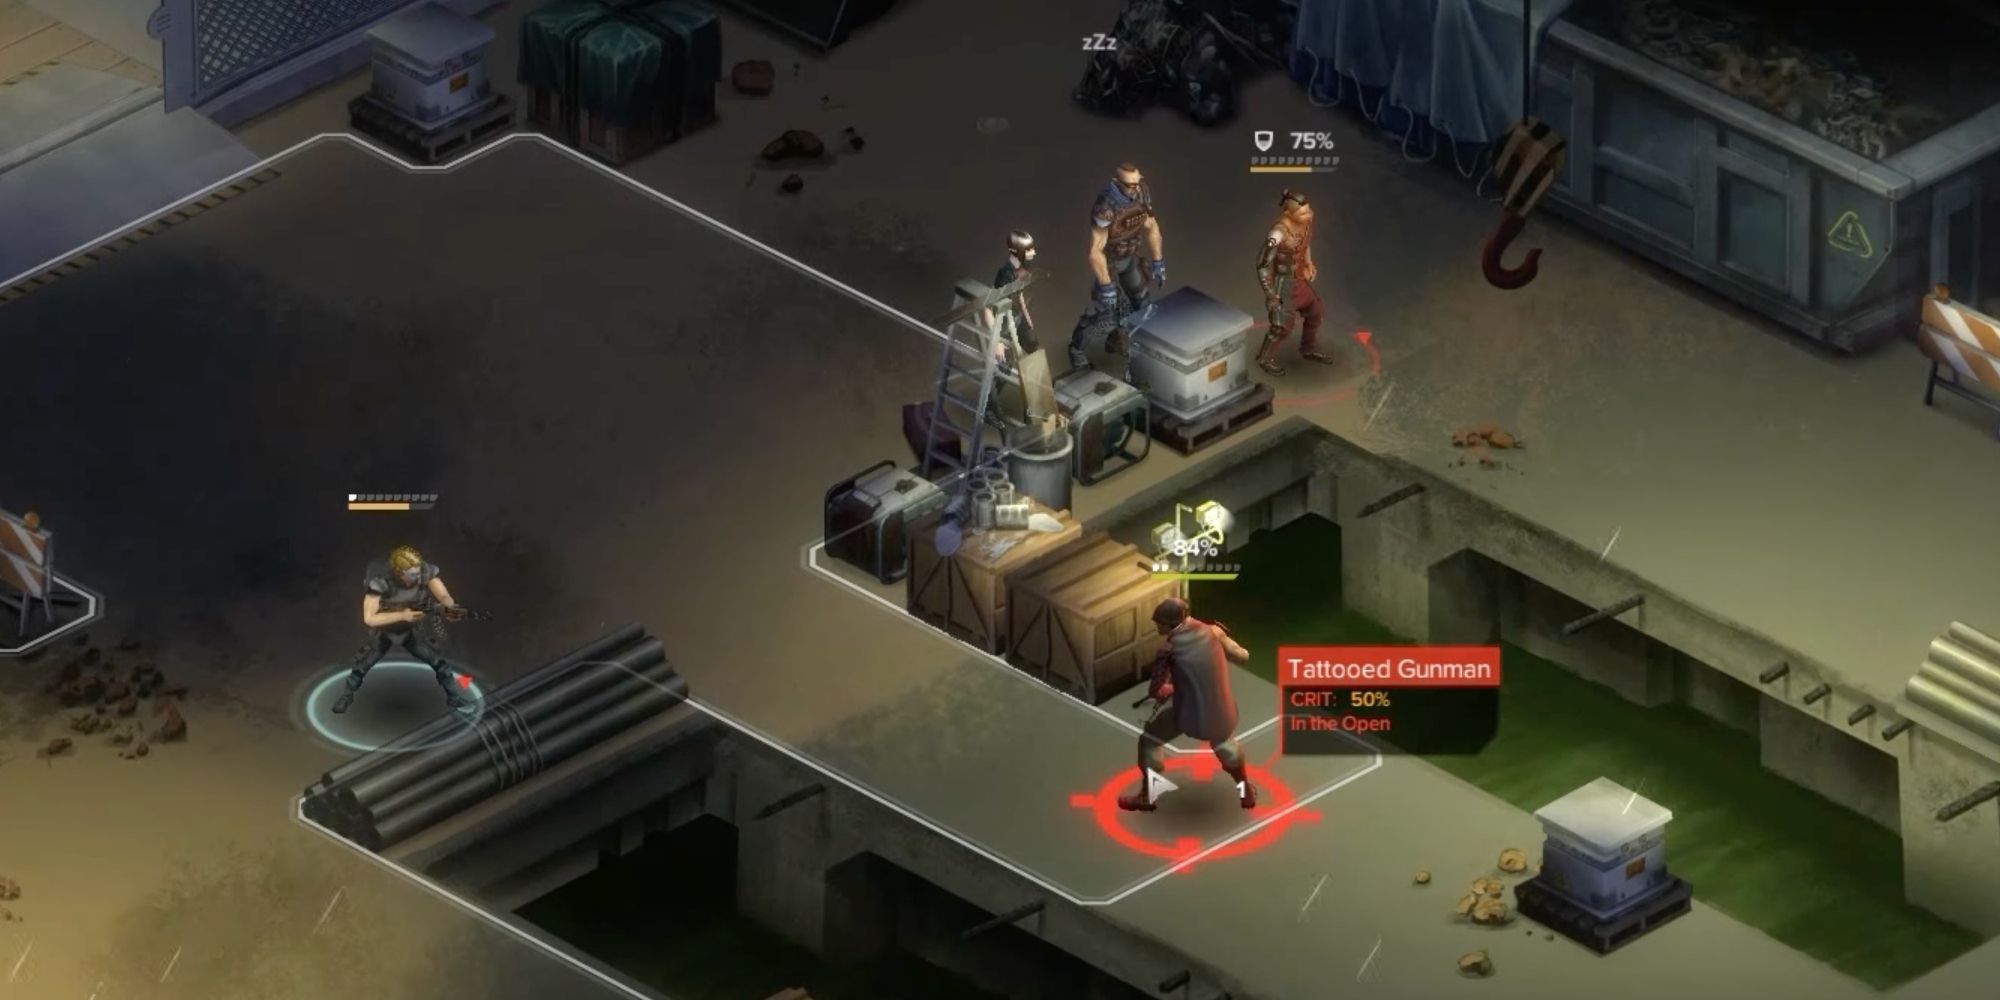 A screenshot from Shadowrun Hong Kong, showing the player targeting a tattooed gunman during the opening mission